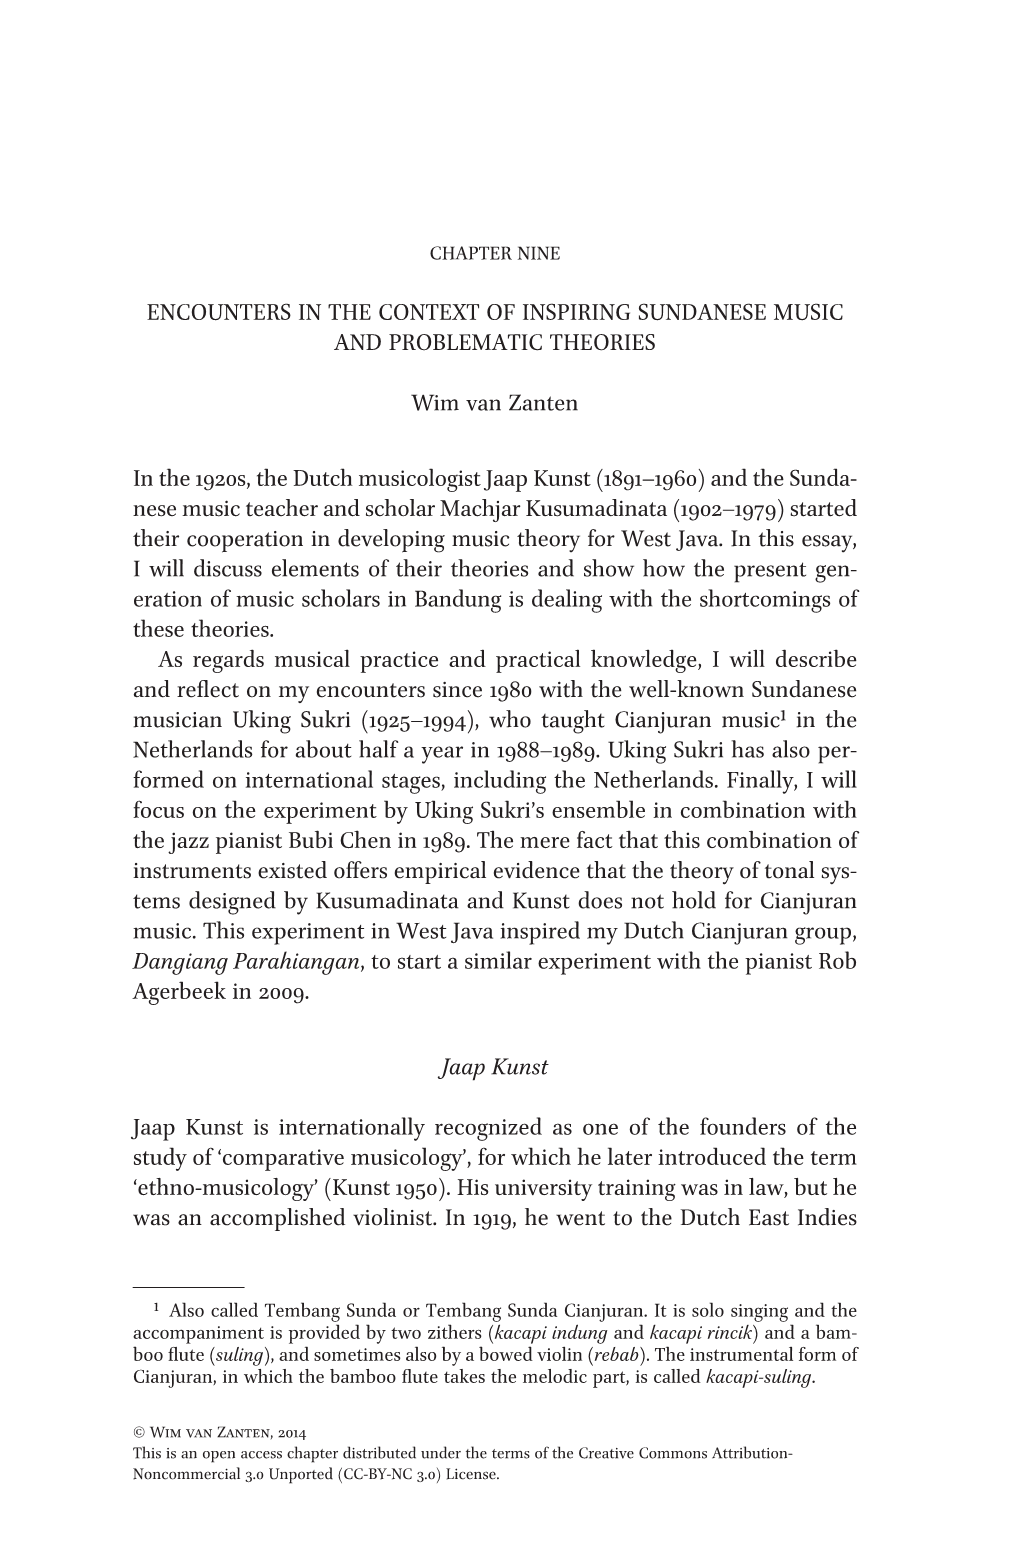 Encounters in the Context of Inspiring Sundanese Music and Problematic Theories